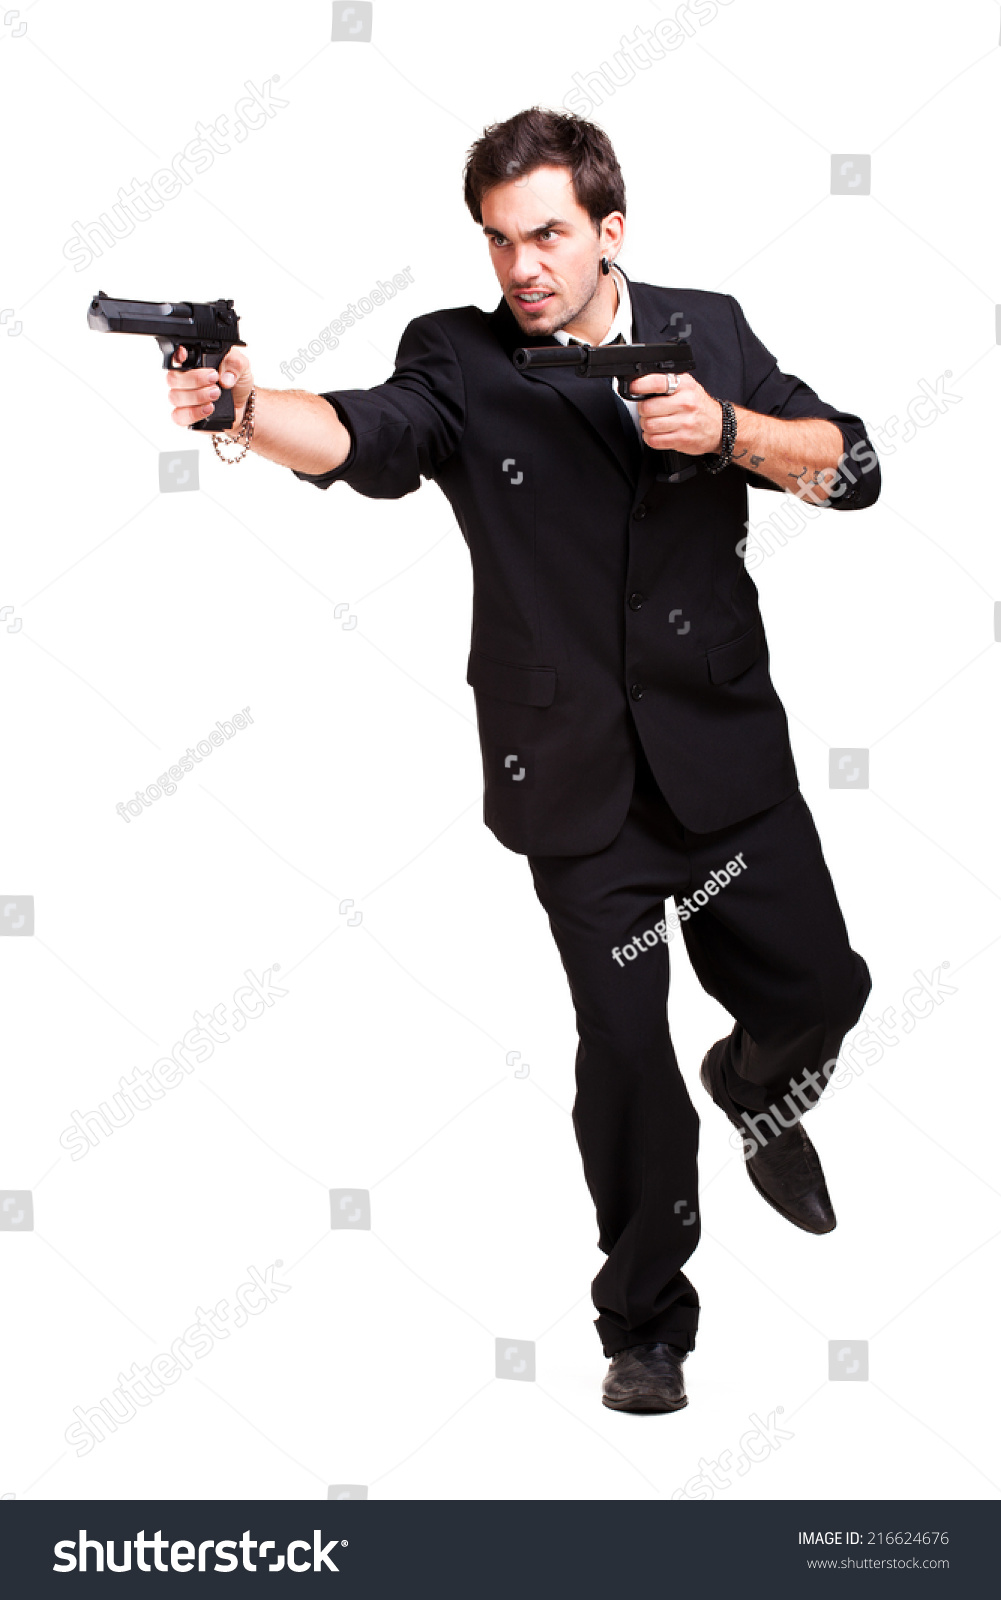 Man Guns On Isolated Background Stock Photo (Edit Now) 216624676